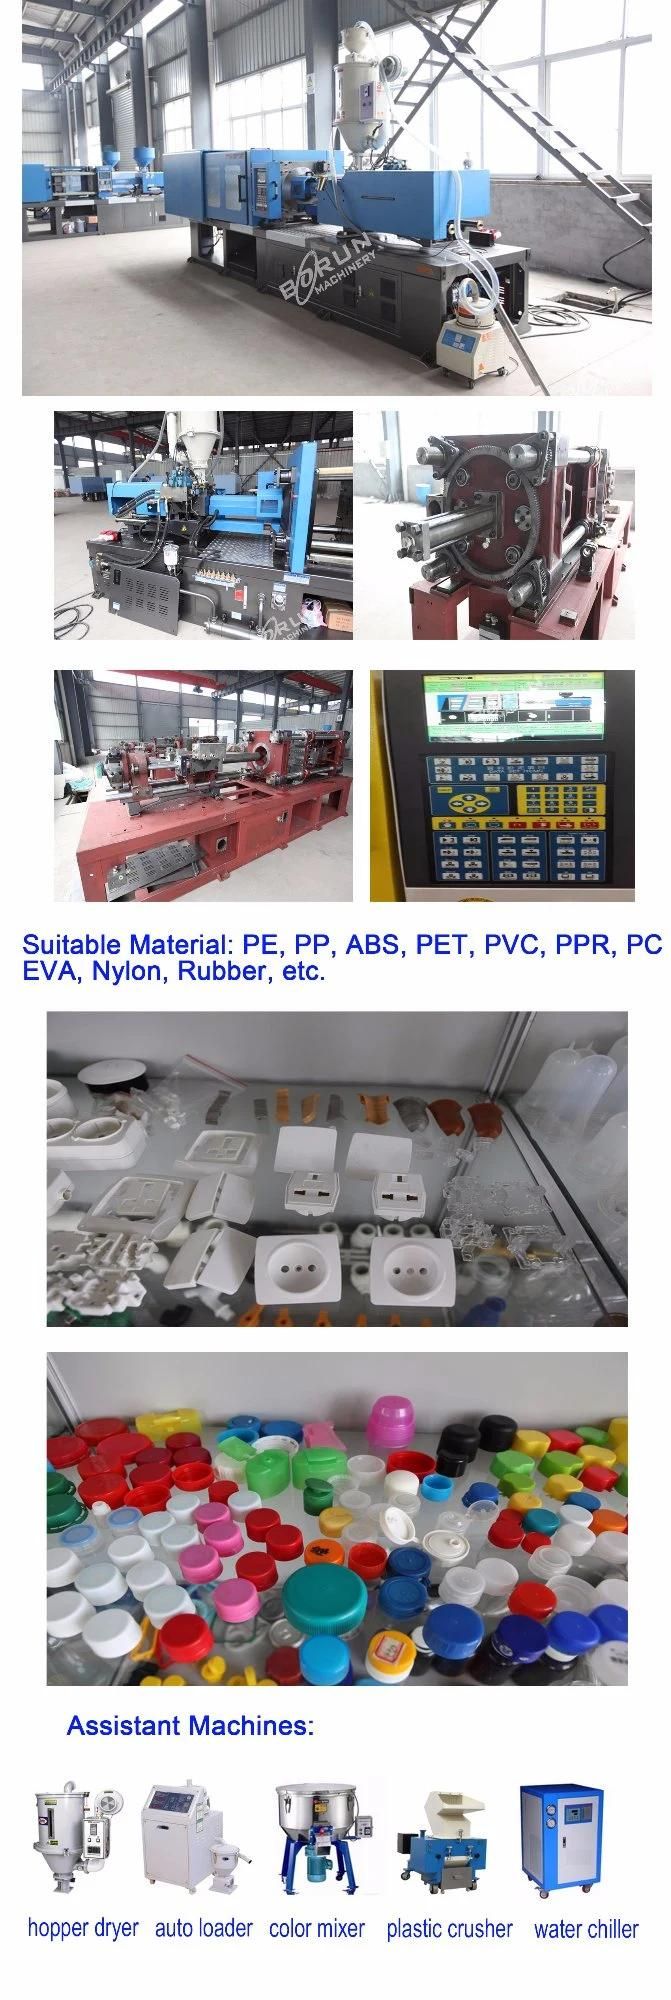 Plastic Pipe Fittings Producing Machine / Injection Molding Machine